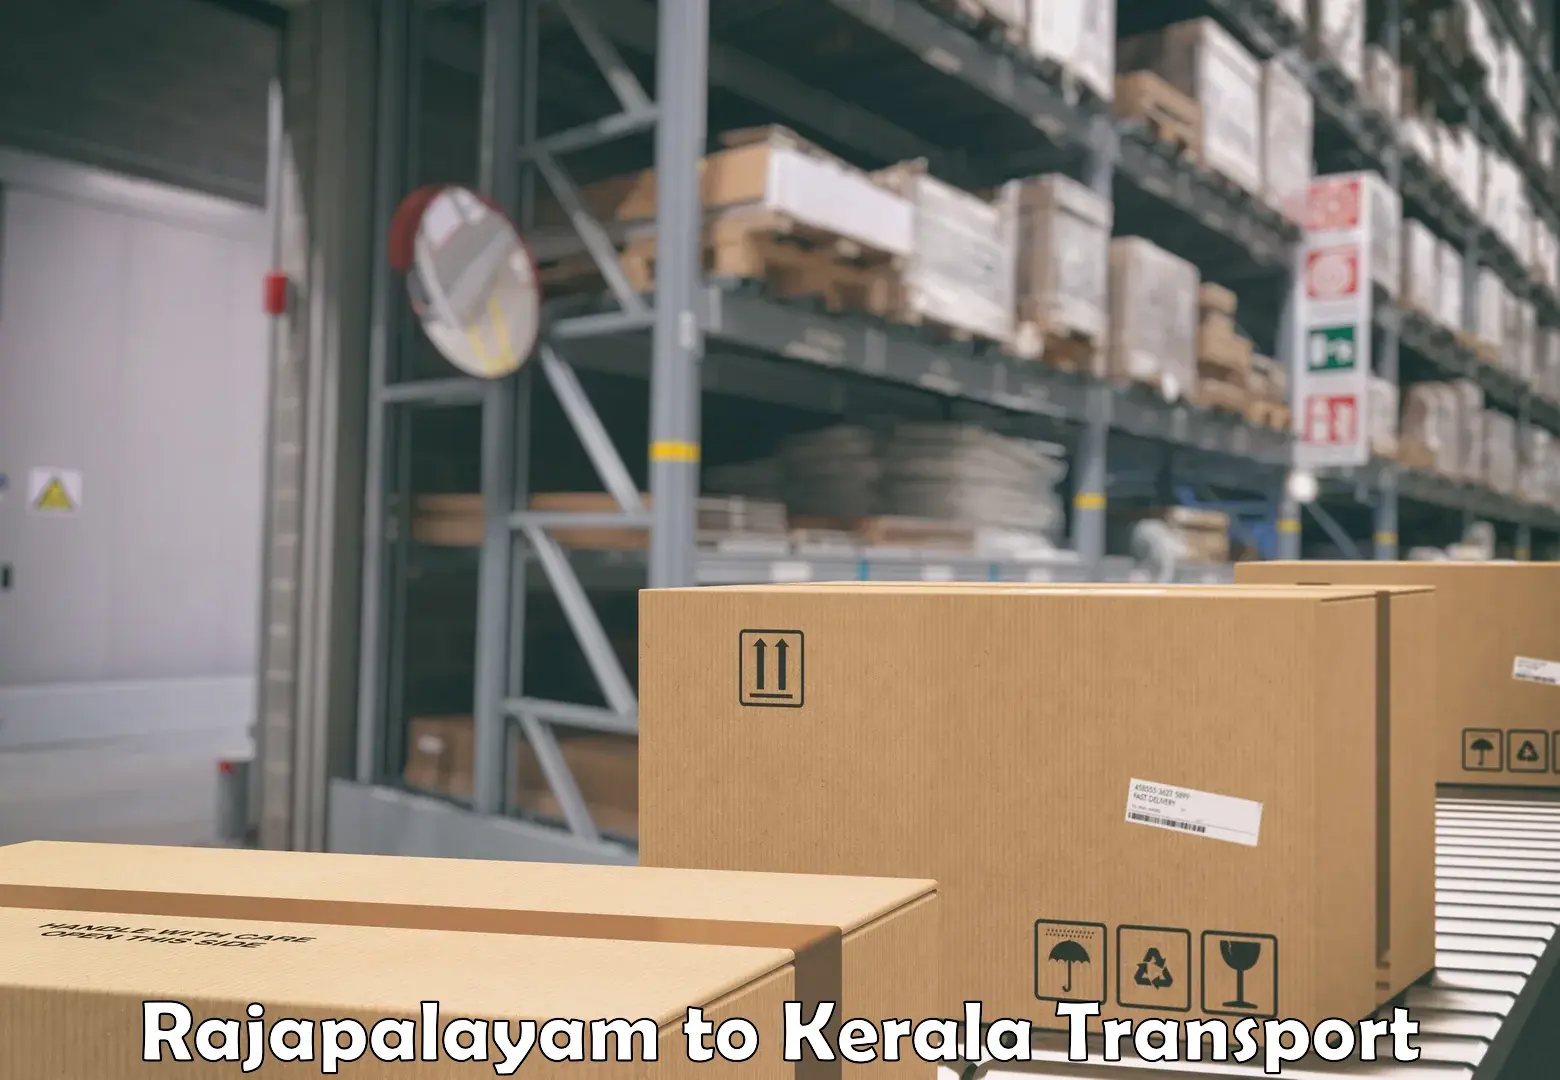 Commercial transport service Rajapalayam to Kannur